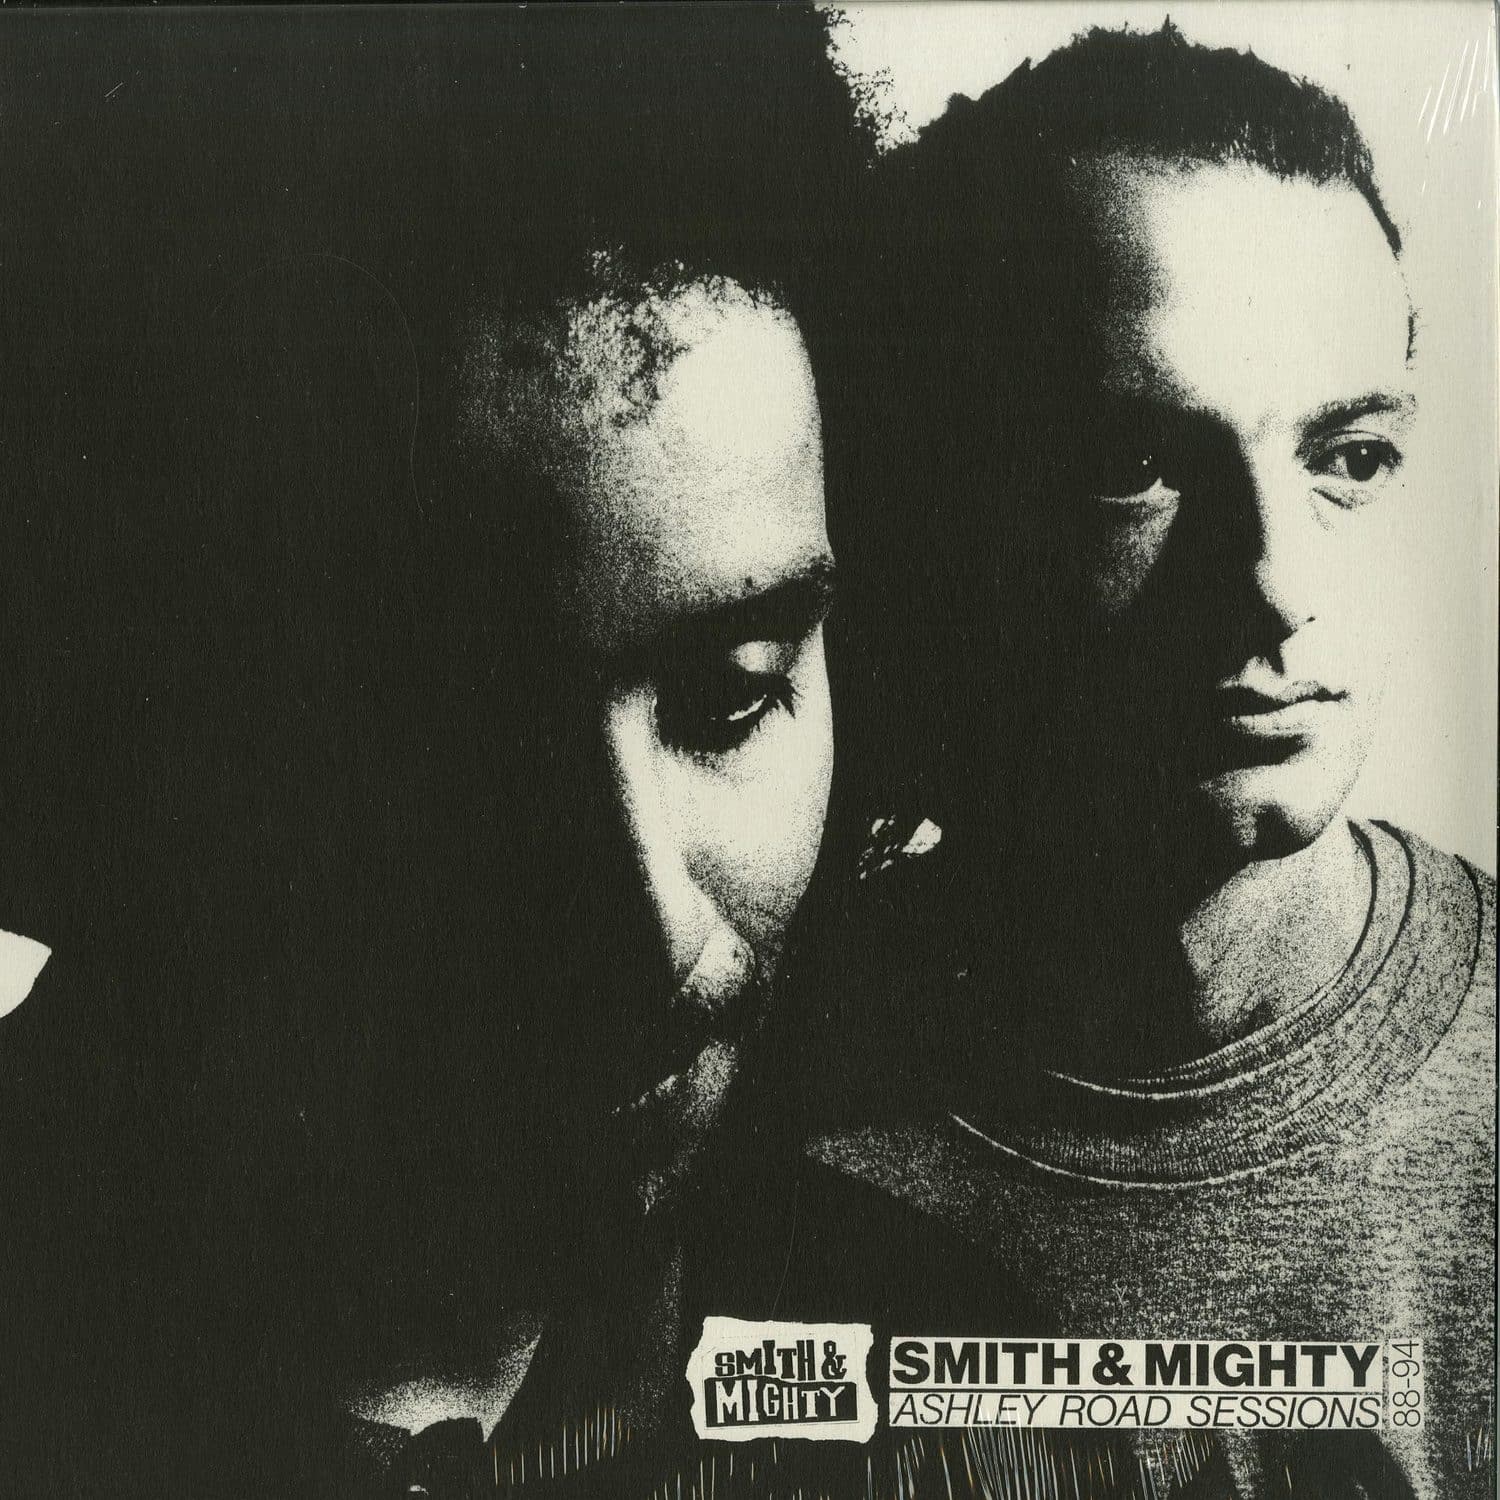 Smith & Mighty - ASHLEY ROAD SESSIONS 88-94 